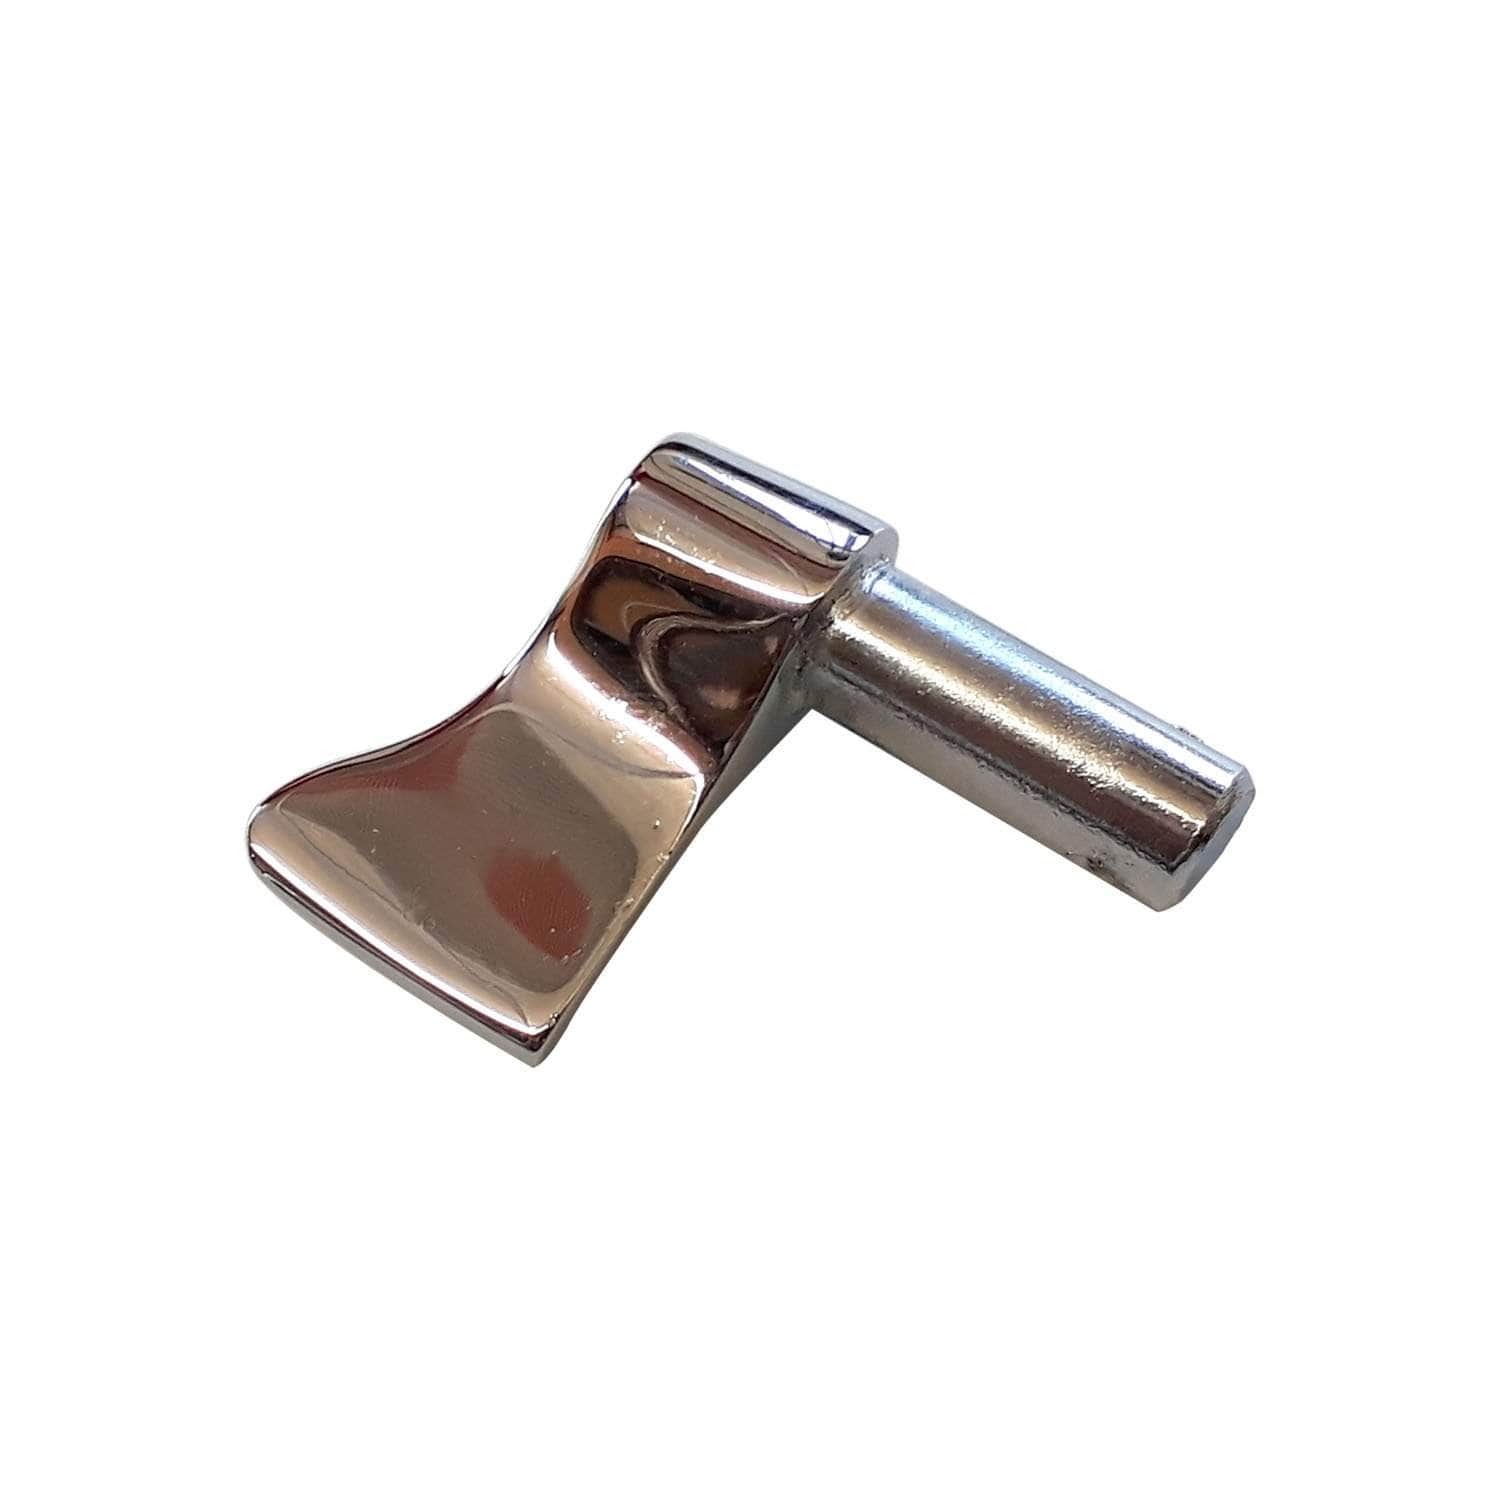 Air Lever for use with 'Standard' Aga range cookers